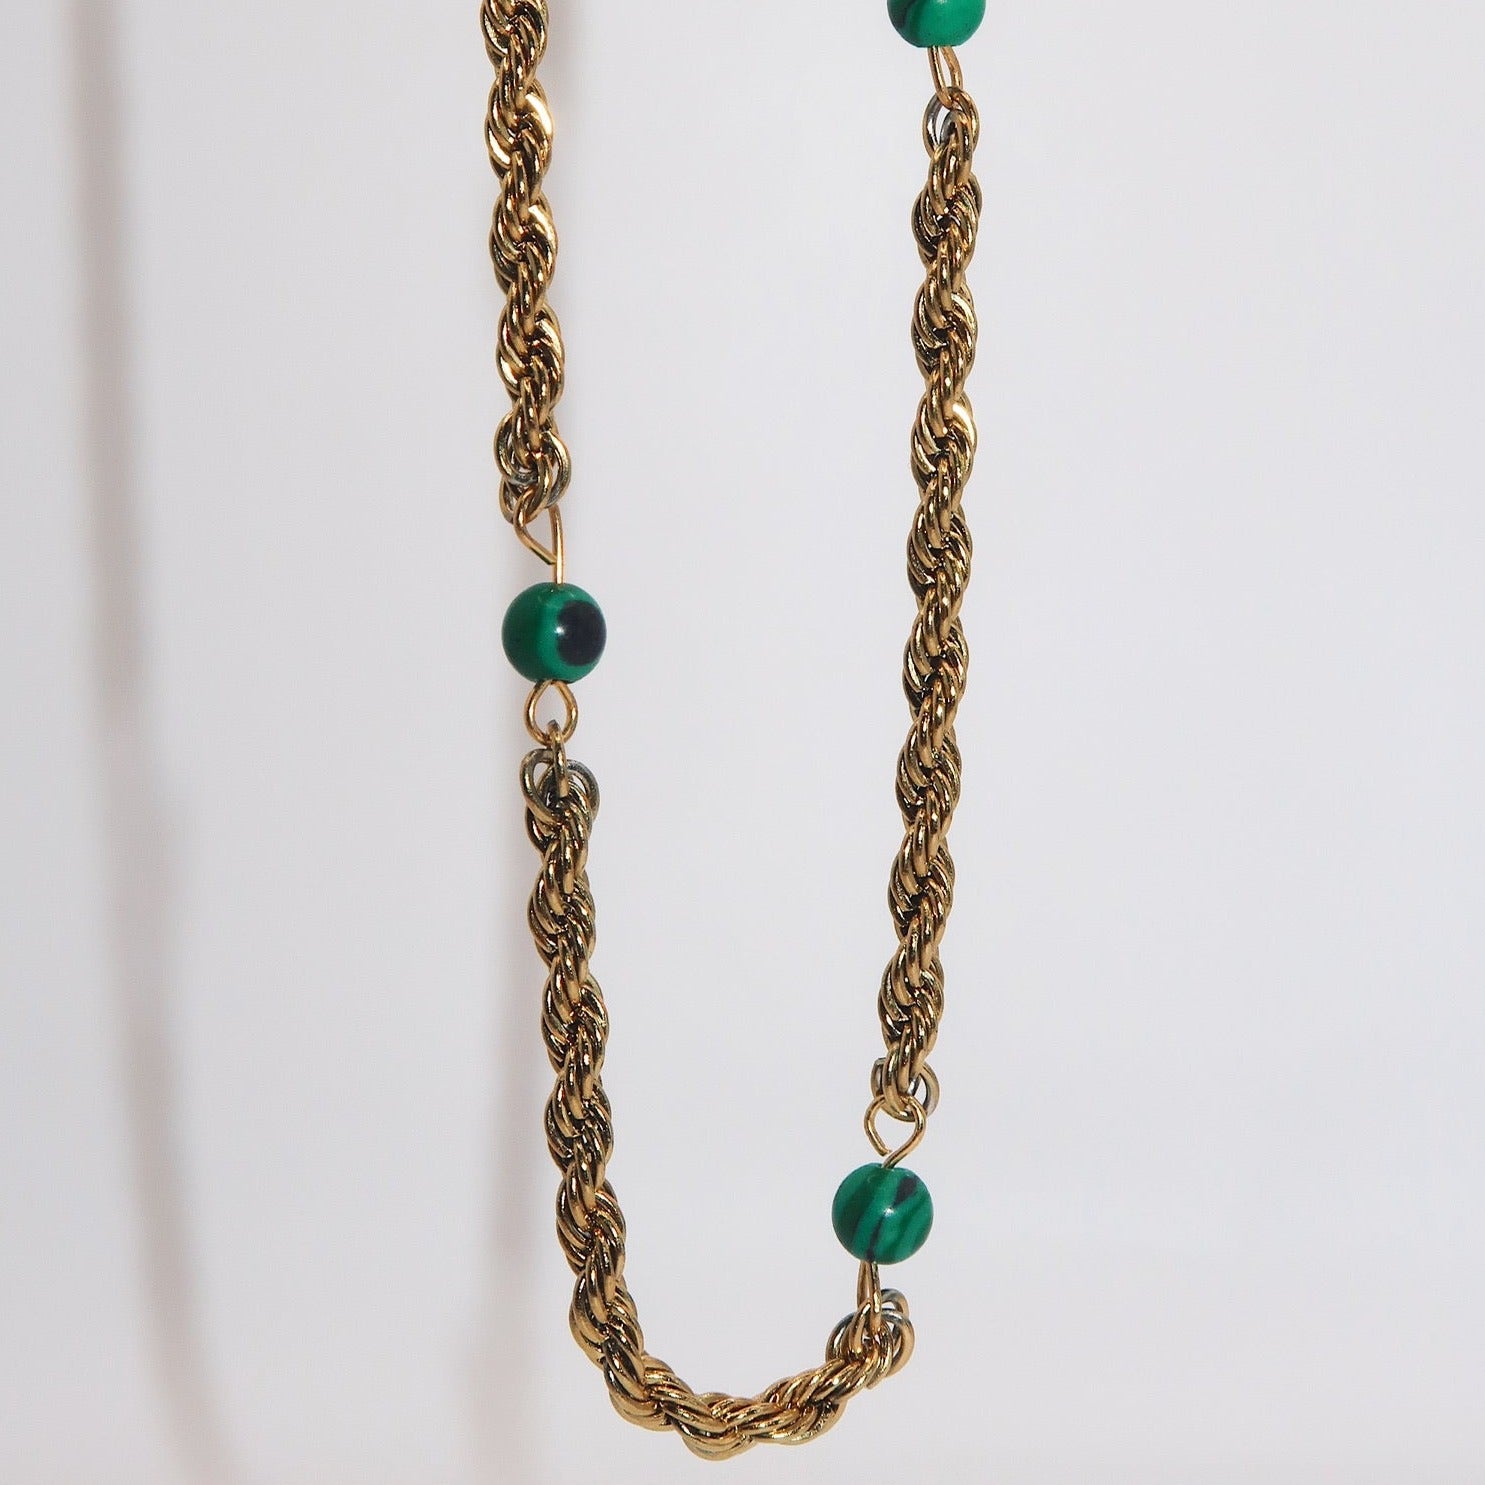 KRYSTAL - 18K PVD Gold Plated Necklace with Green Bead Detail - Mixed Metals